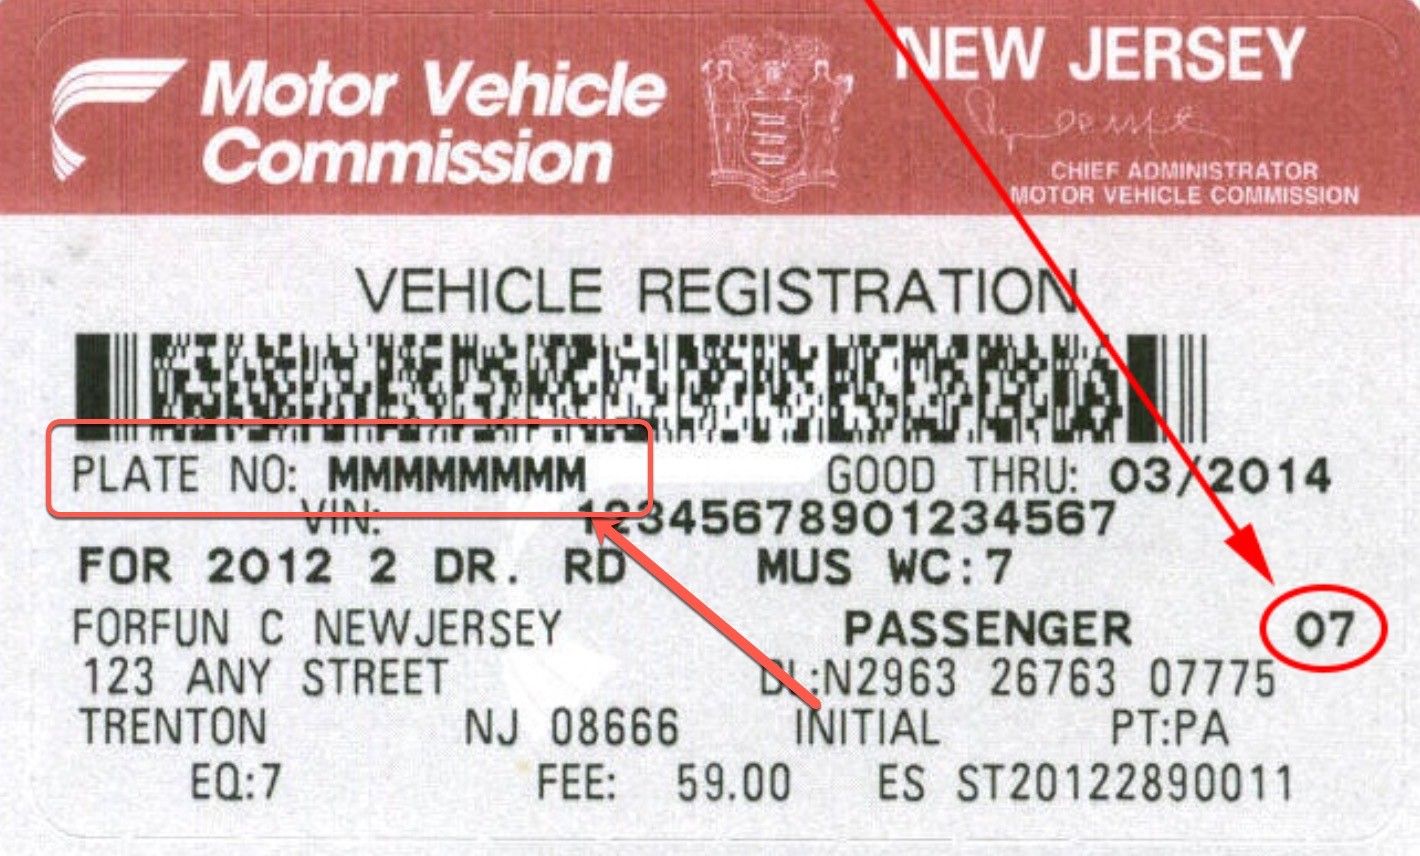 New Jersey vehicle registration card